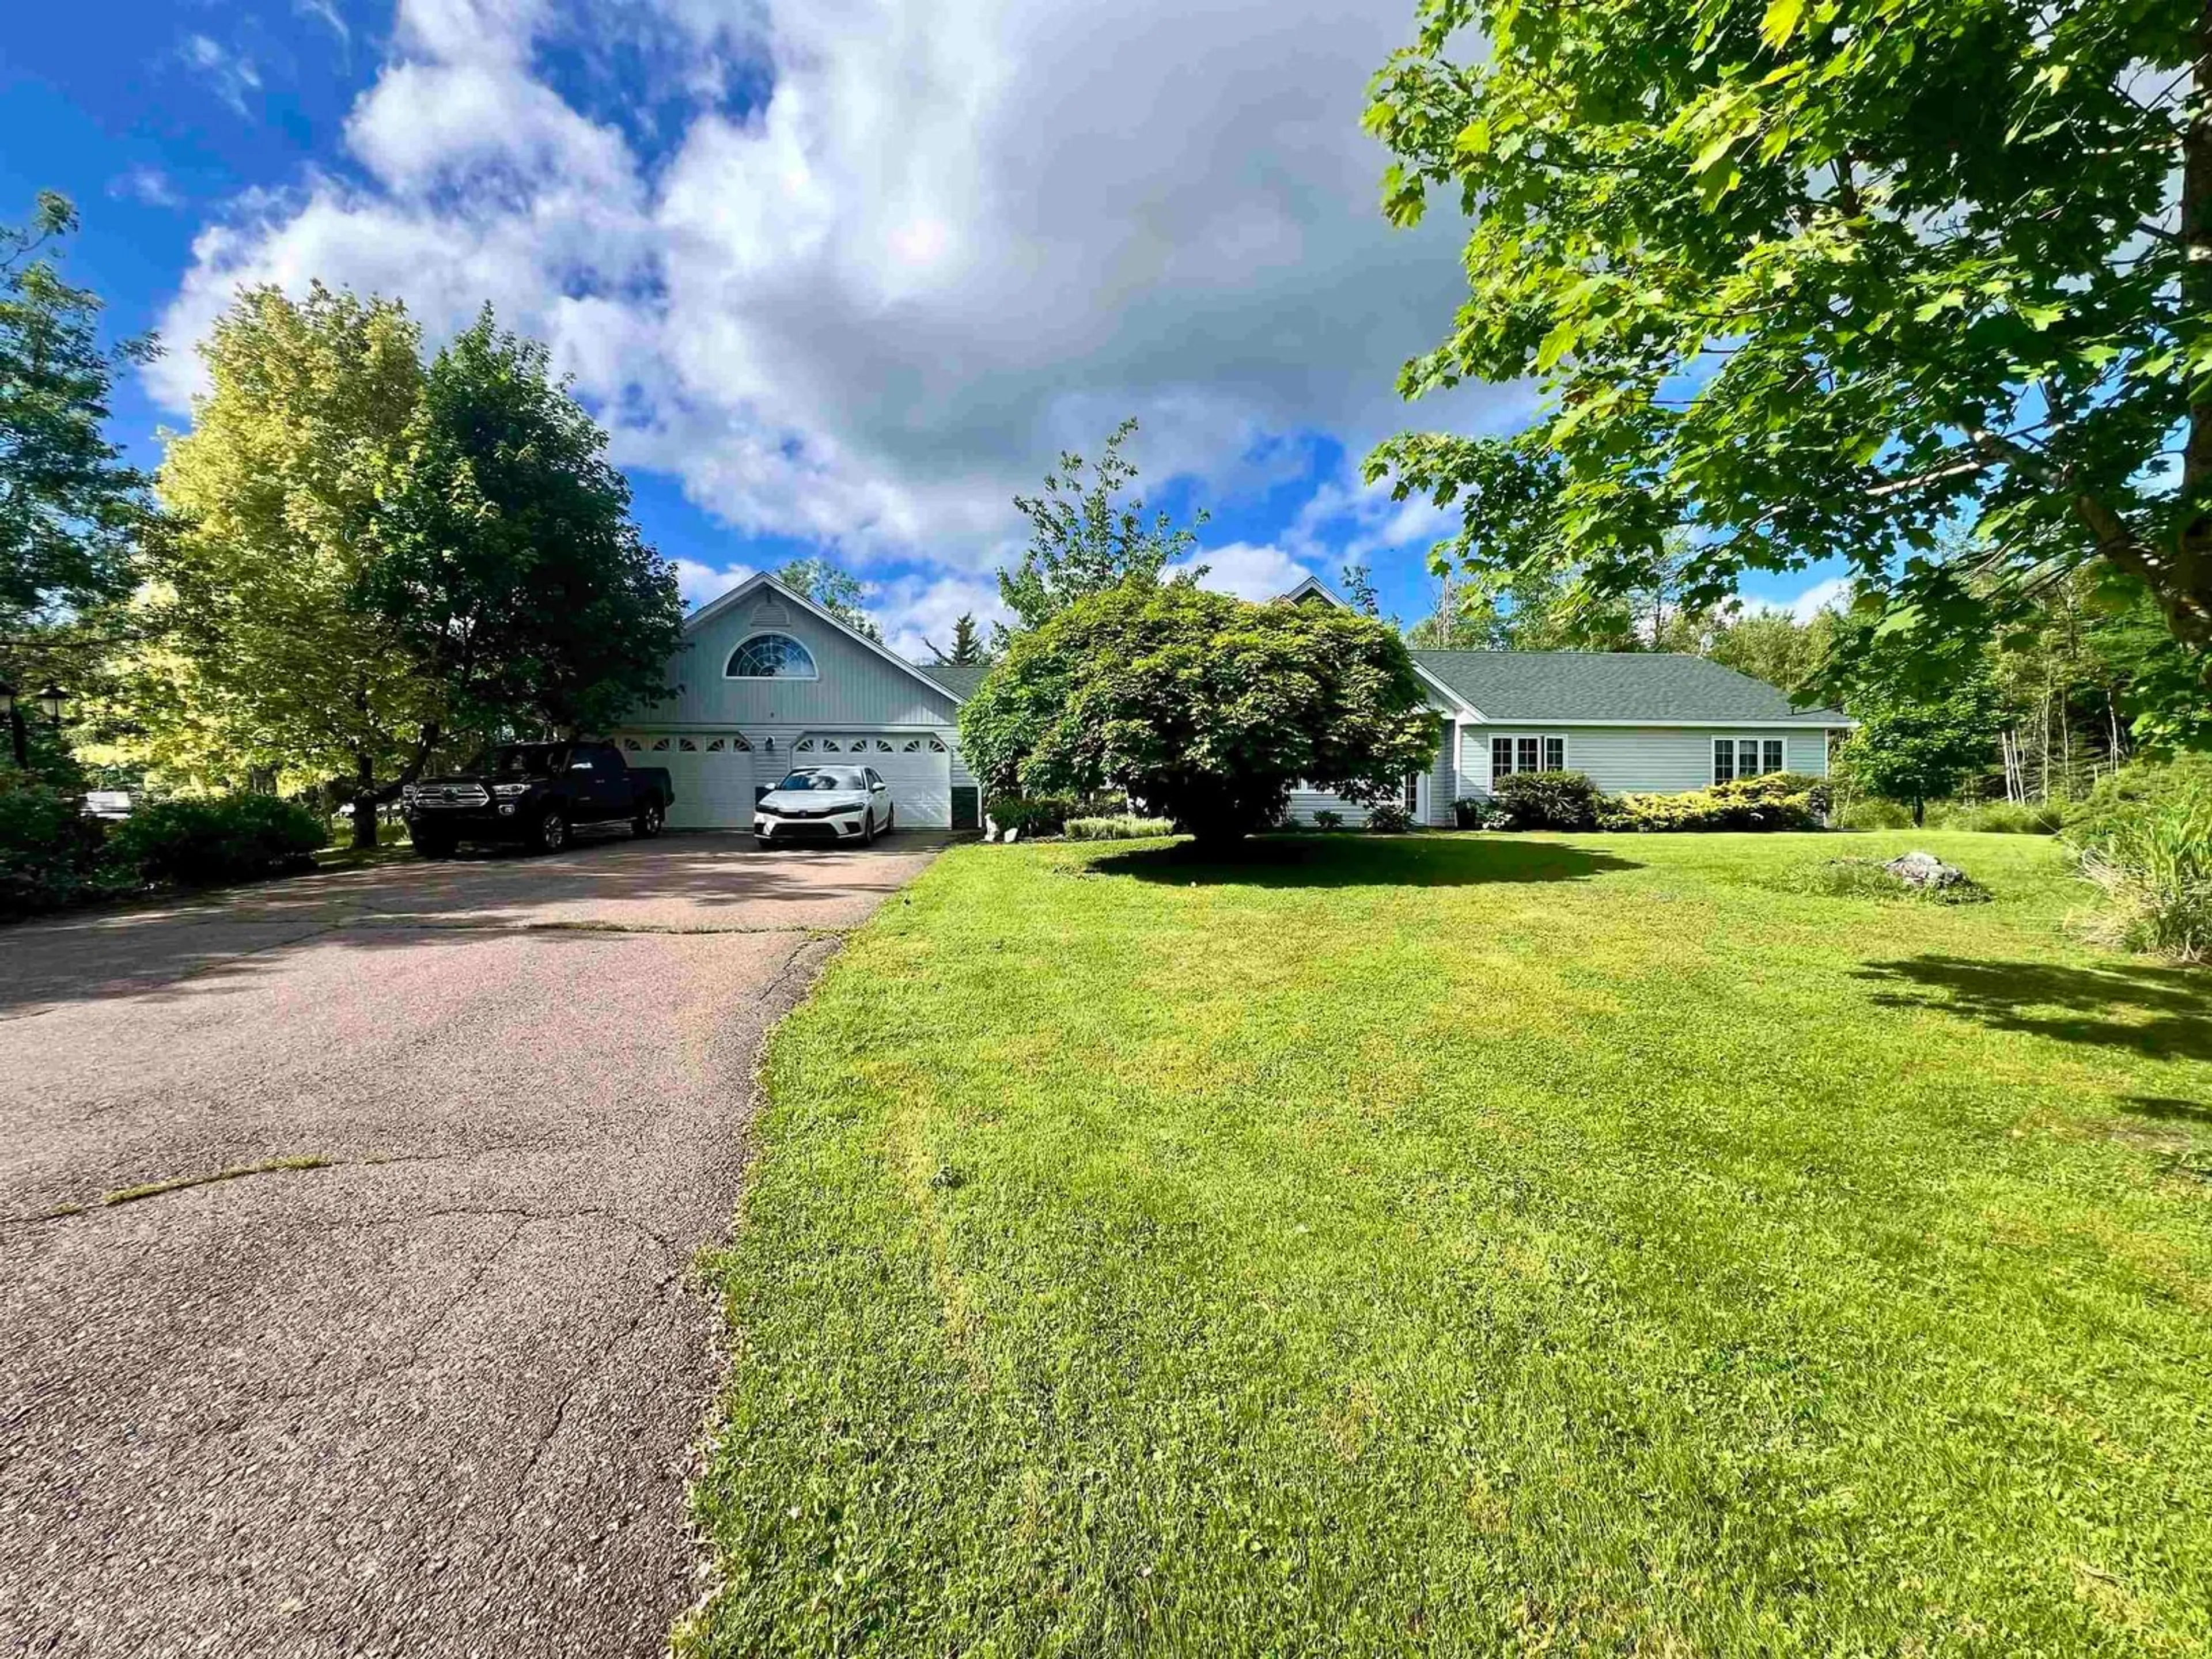 Outside view for 1042 Pleasant Valley Rd, Pleasant Valley Nova Scotia B0N 1C0